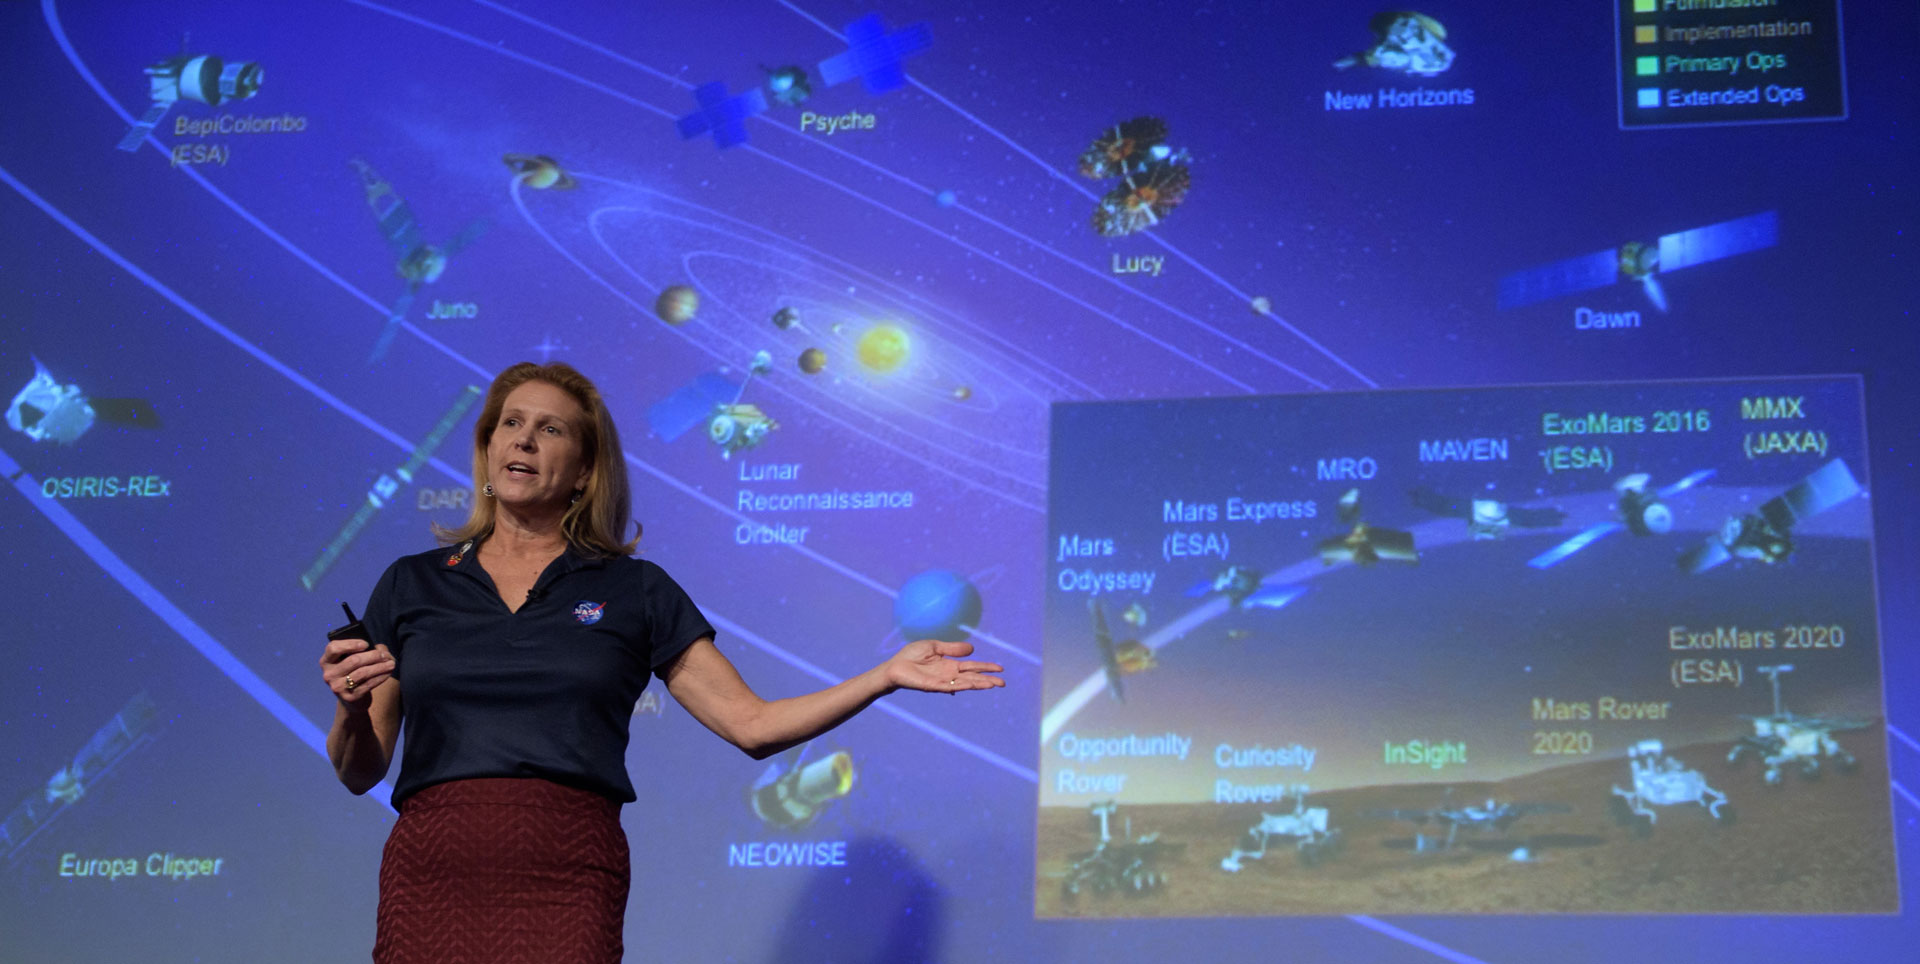 Lori Glaze is the director of planetary science at NASA. 
